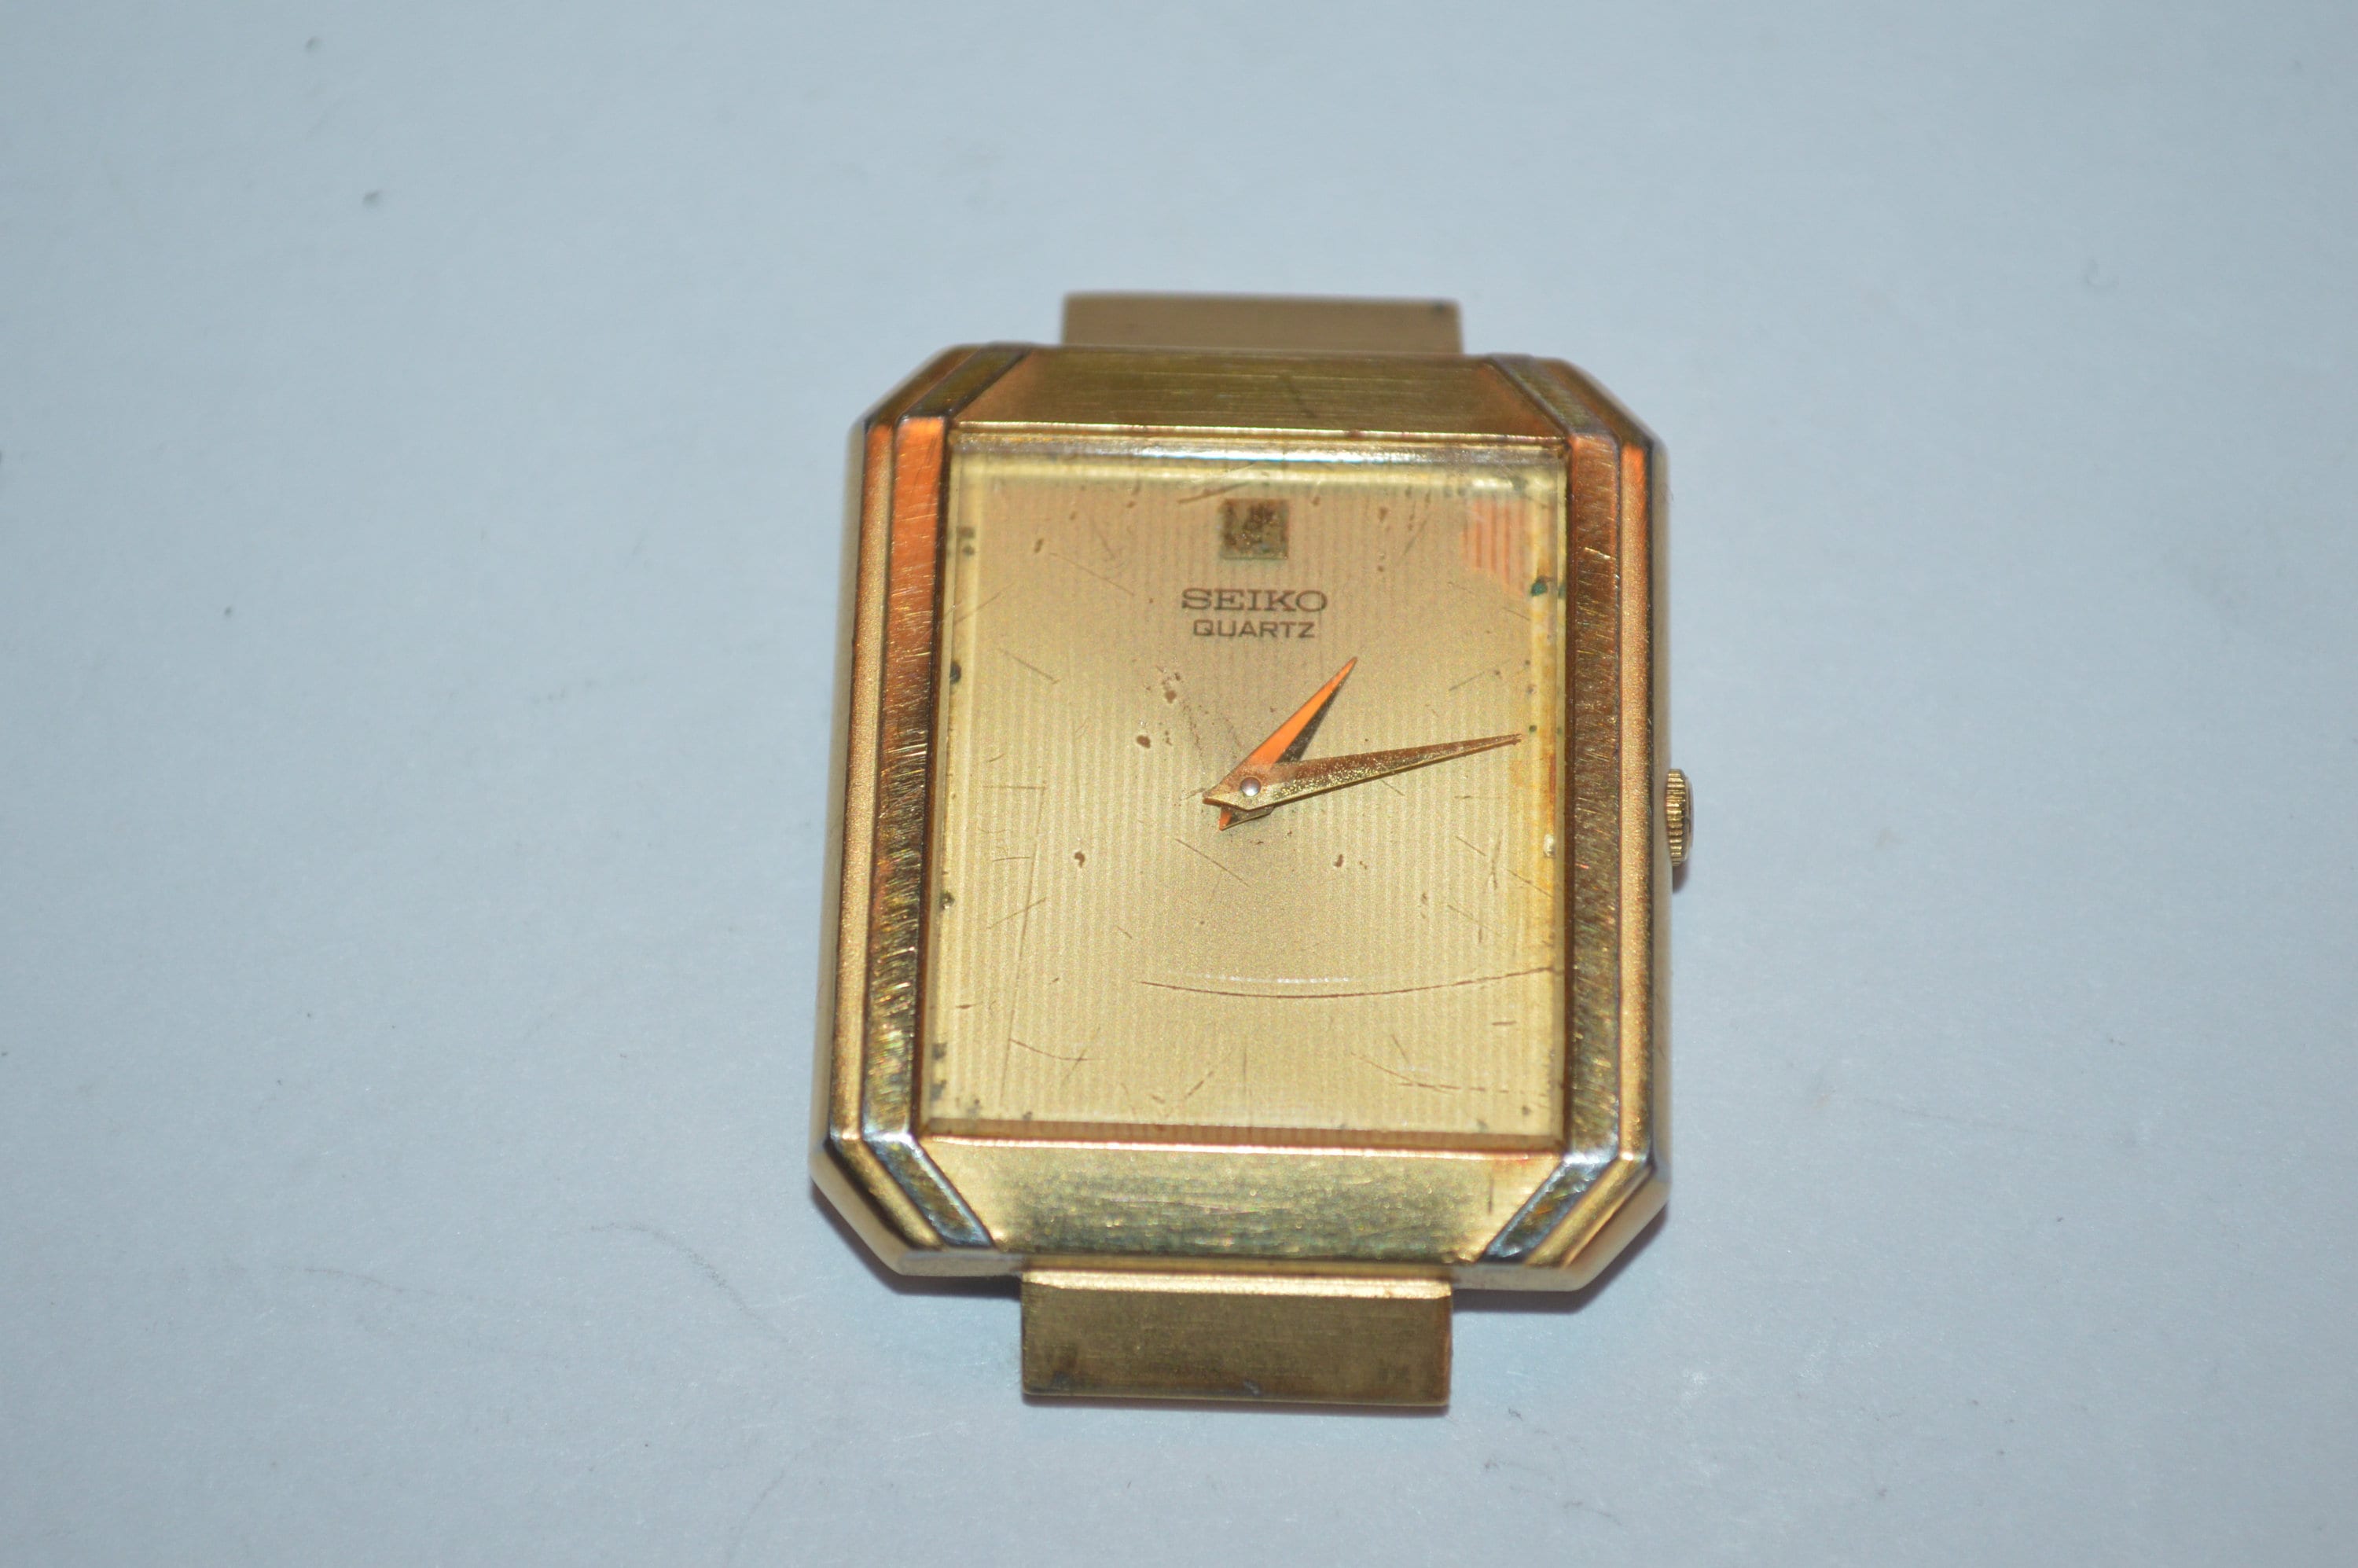 Vintage SEIKO Quartz Watch 7430-5479 Not Working Sold As-is - Etsy